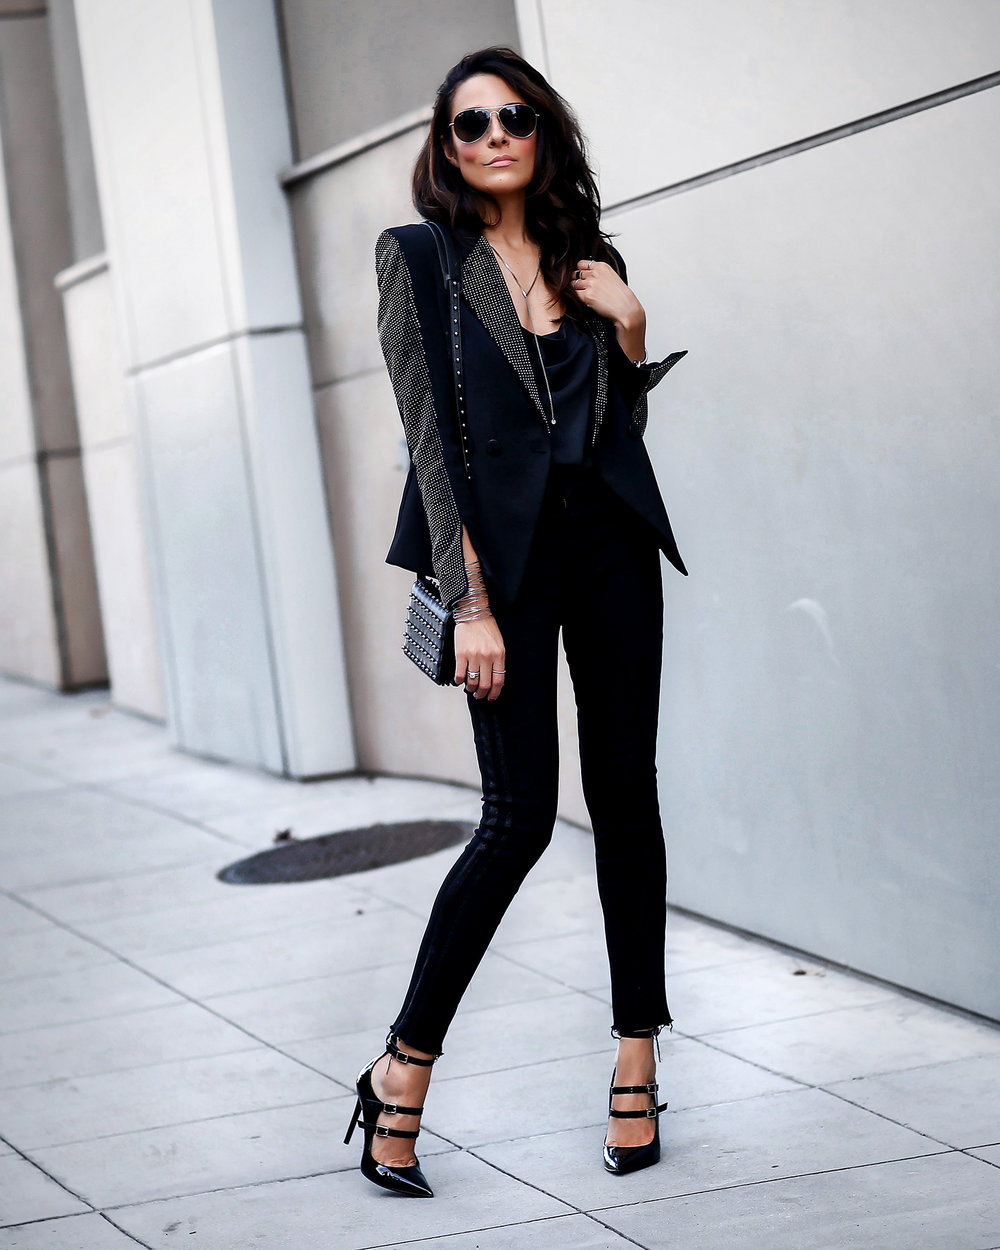 The Statement Making Blazer! — lucy's whims